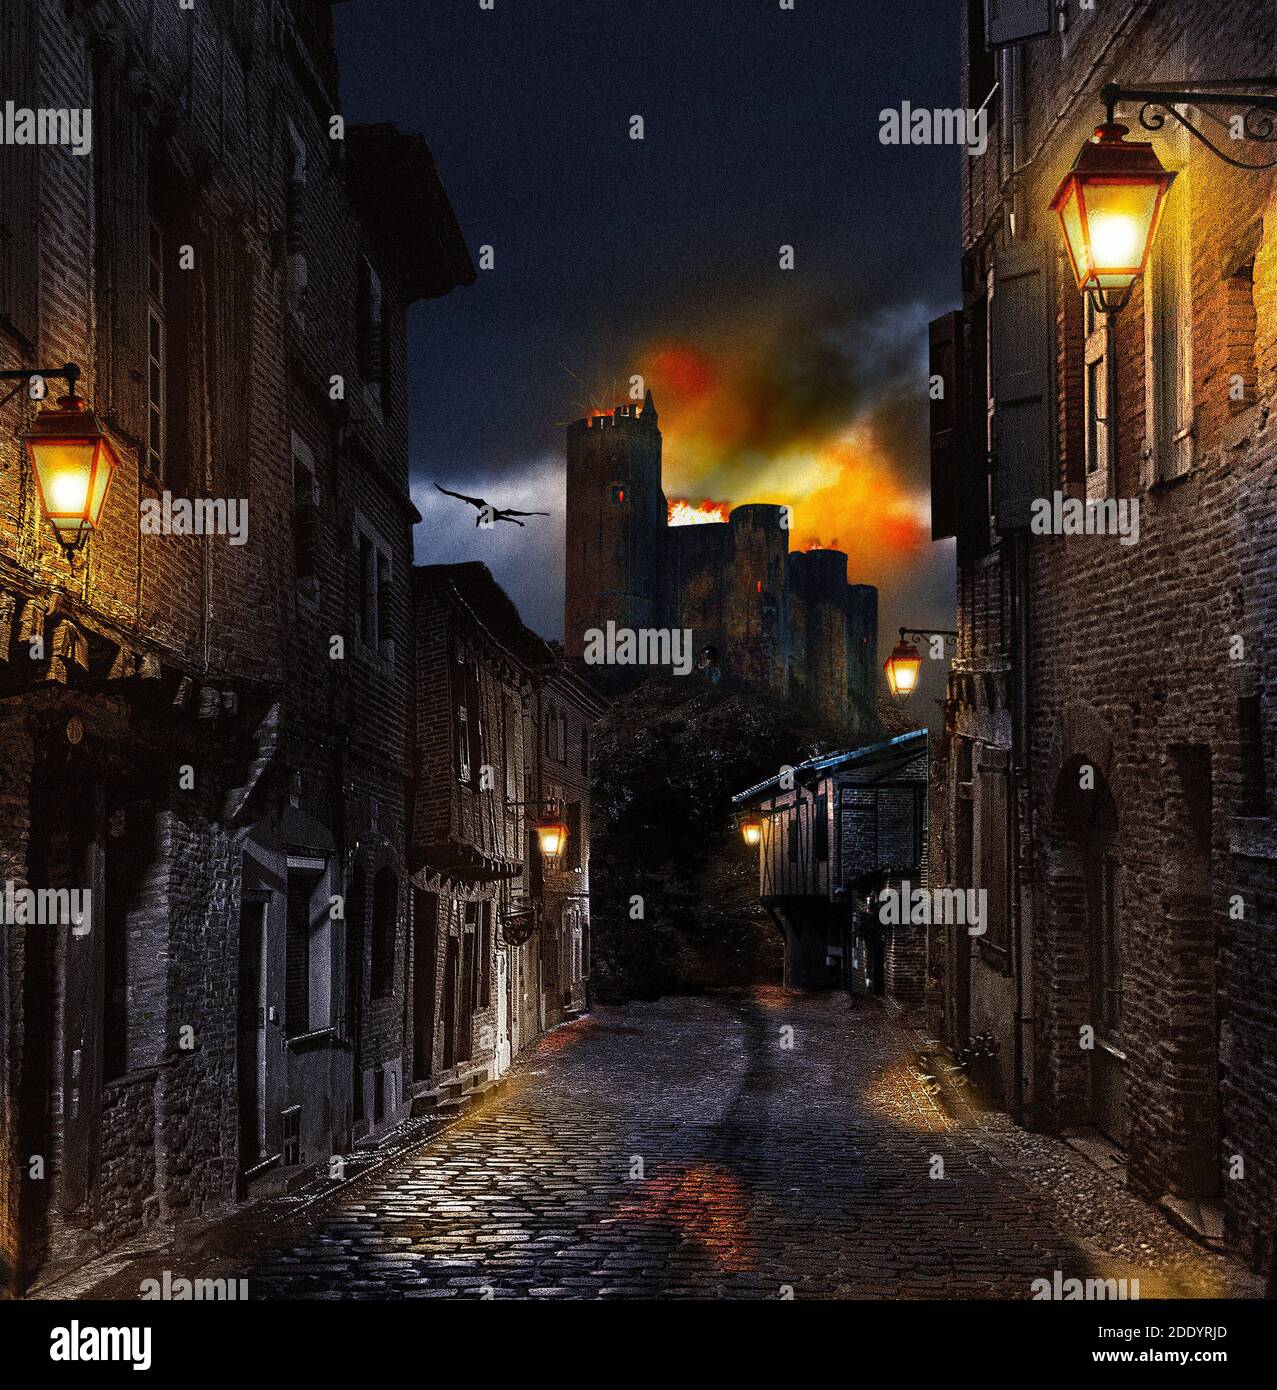 A dusk Photoshop diorama of a burning medieval castle, seen from a nearby village. A silhouetted dragon flies over the scene in the background. Stock Photo